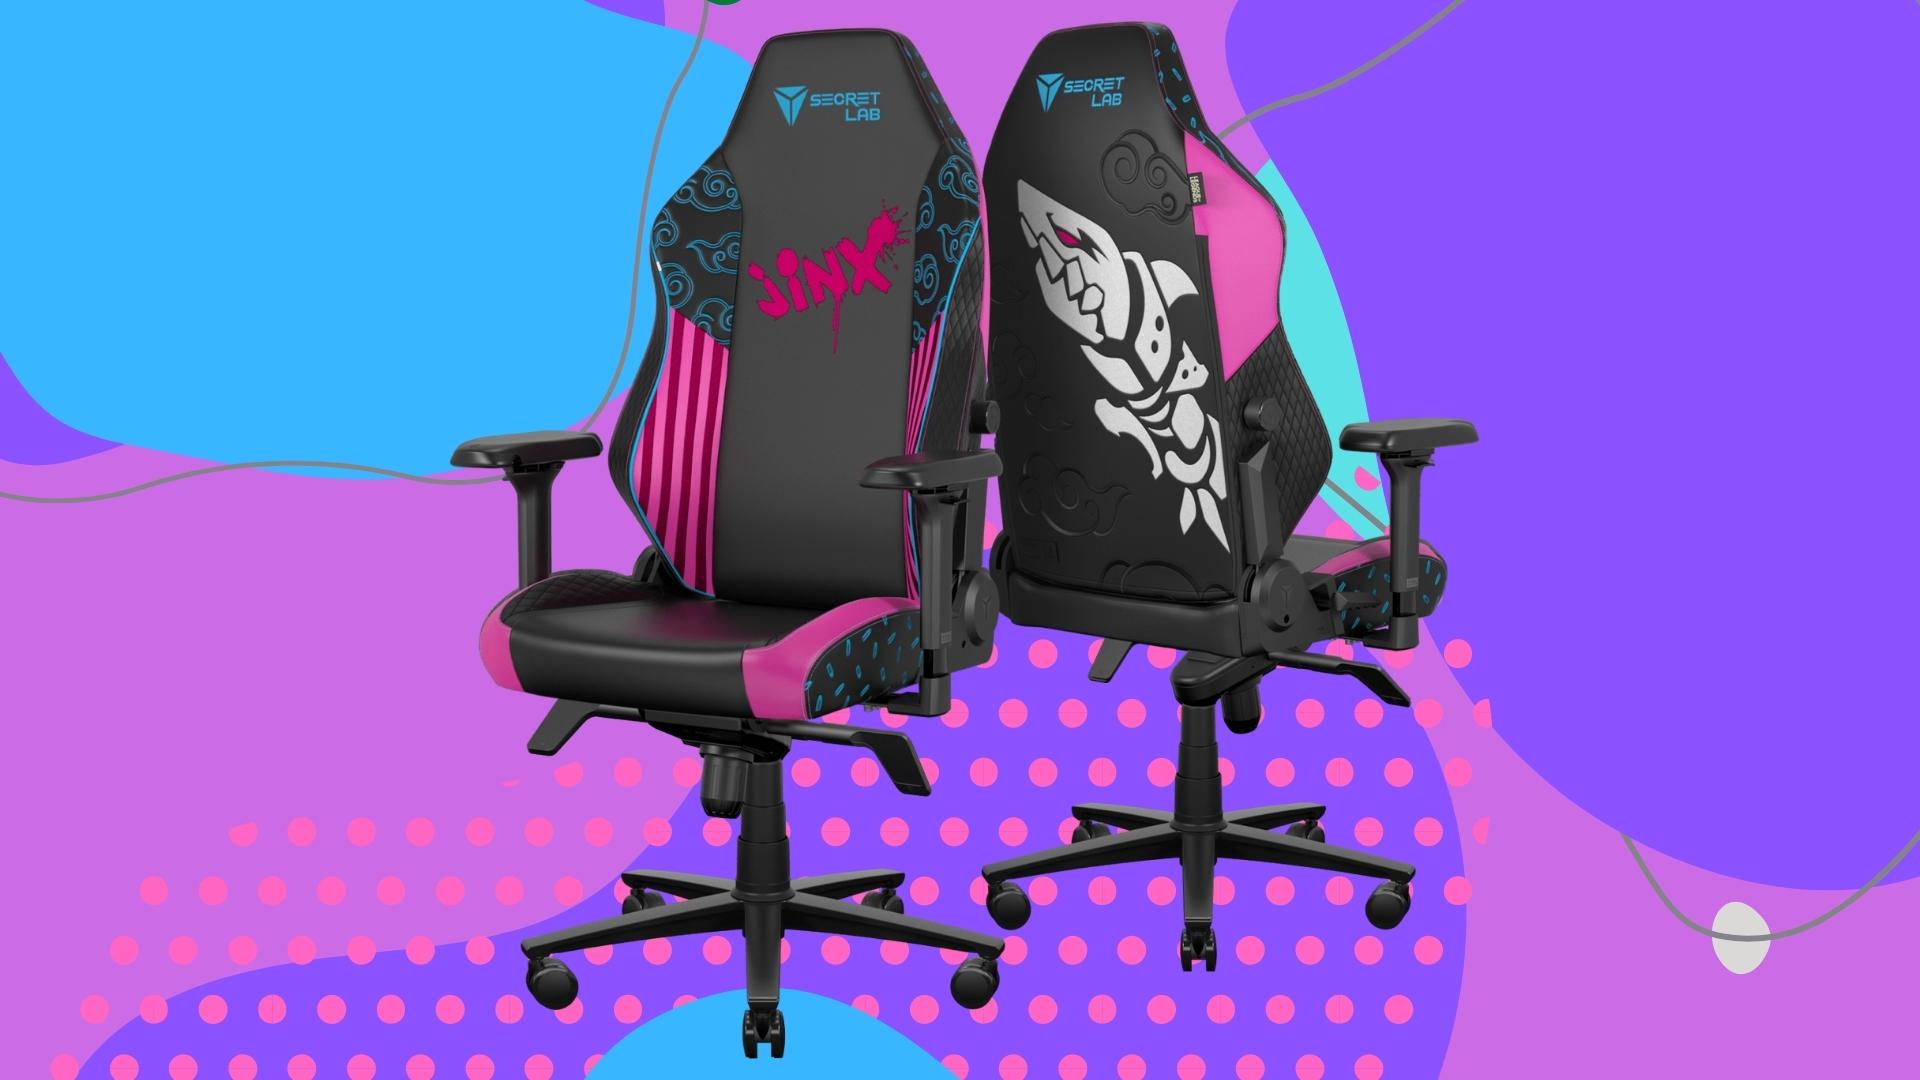 The Jinx special edition gaming chair from Secretlab